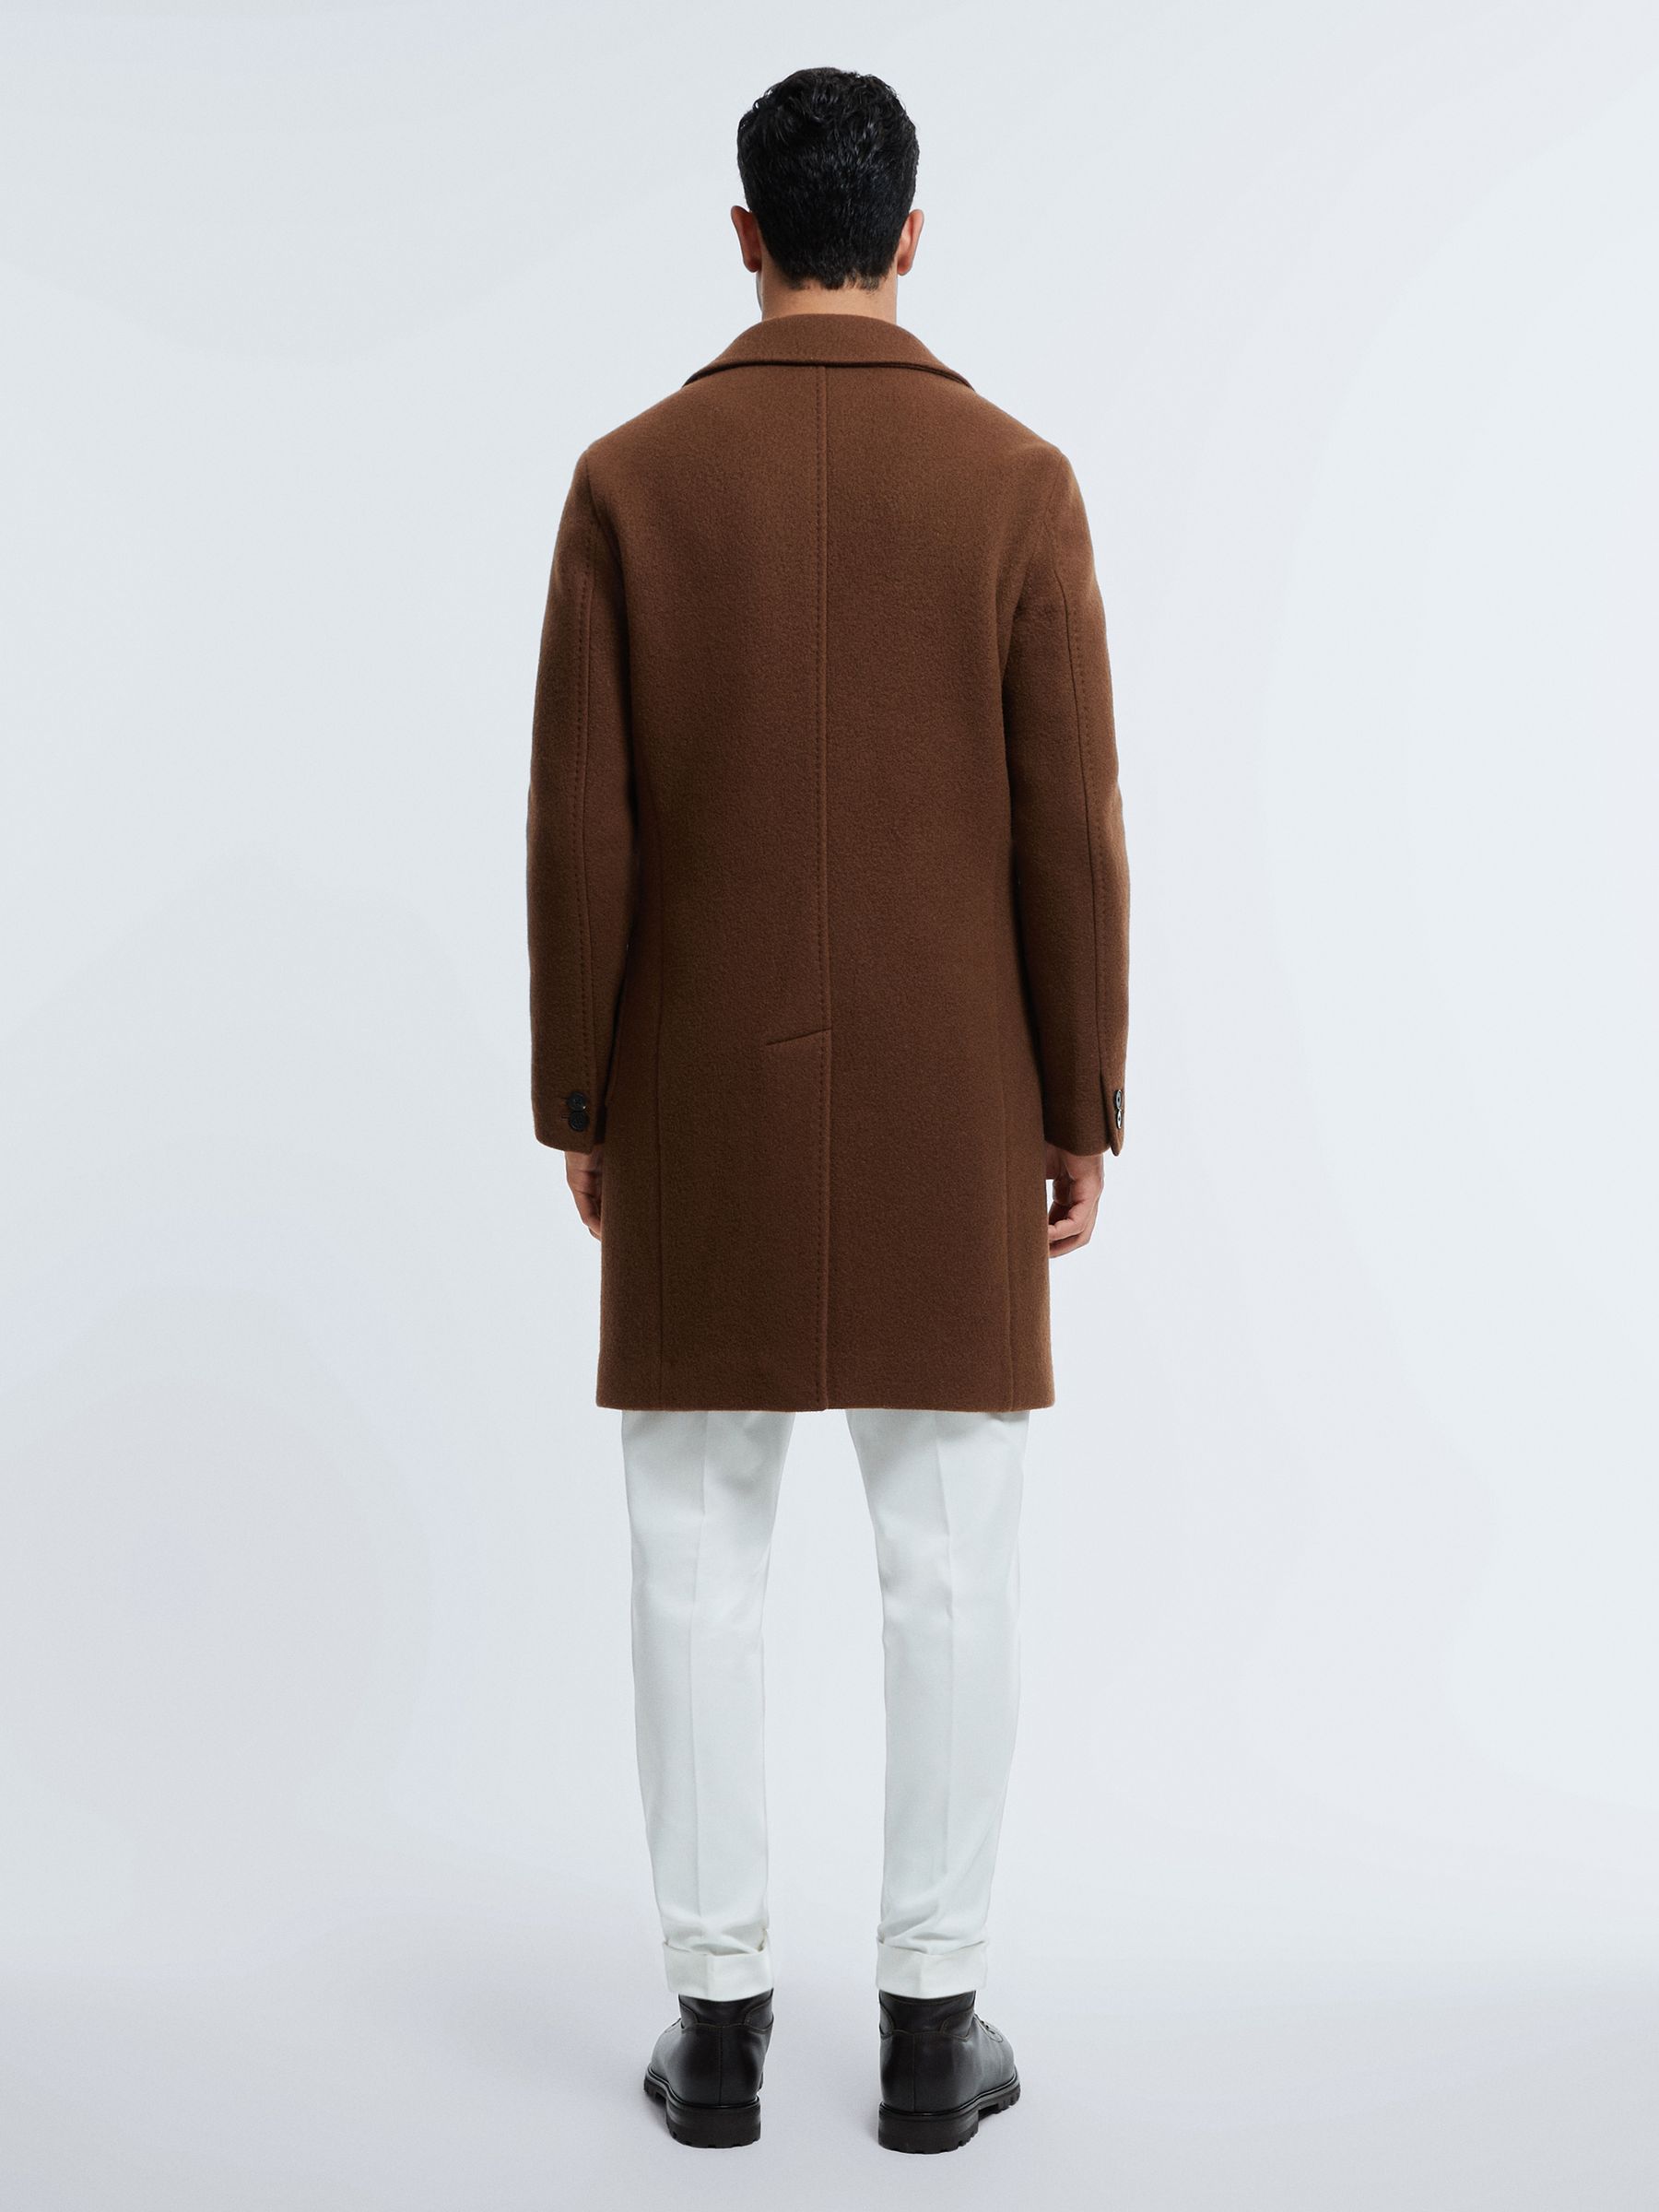 Atelier Casentino Wool Blend Single Breasted Coat | REISS USA